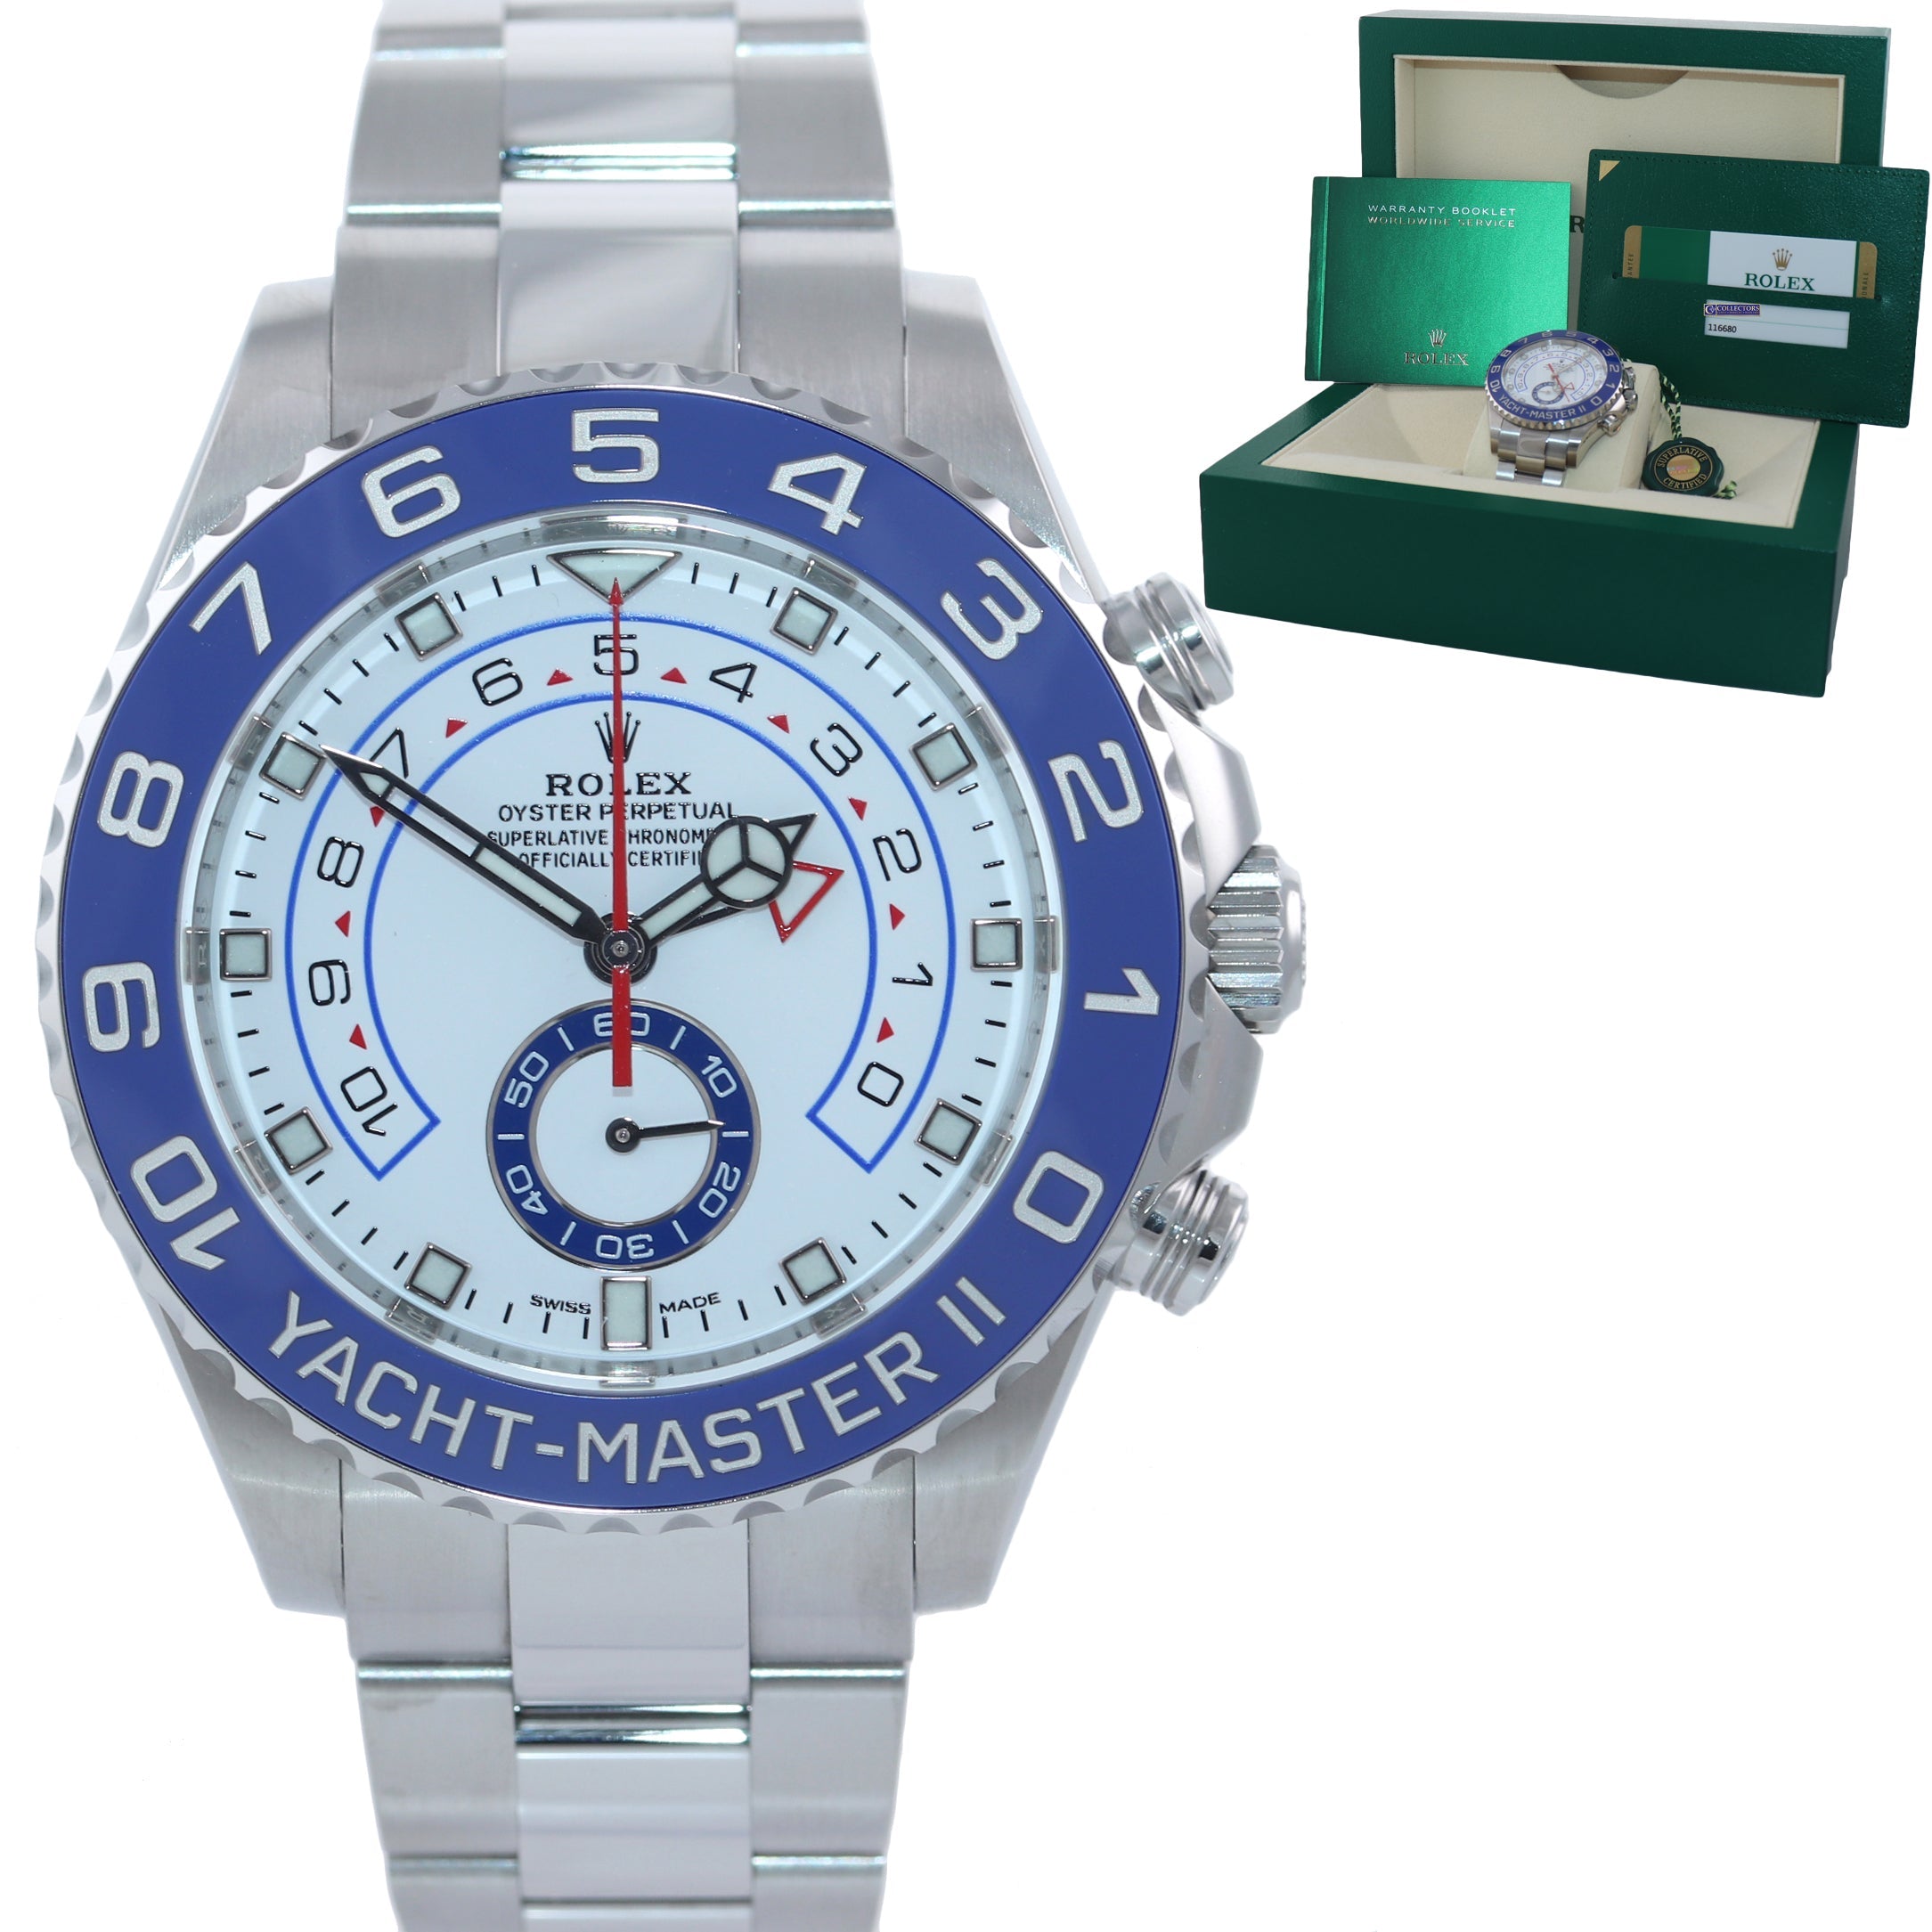 2019 PAPERS Rolex Yacht-Master 2 NEW HANDS Steel Blue 116680 Watch Box